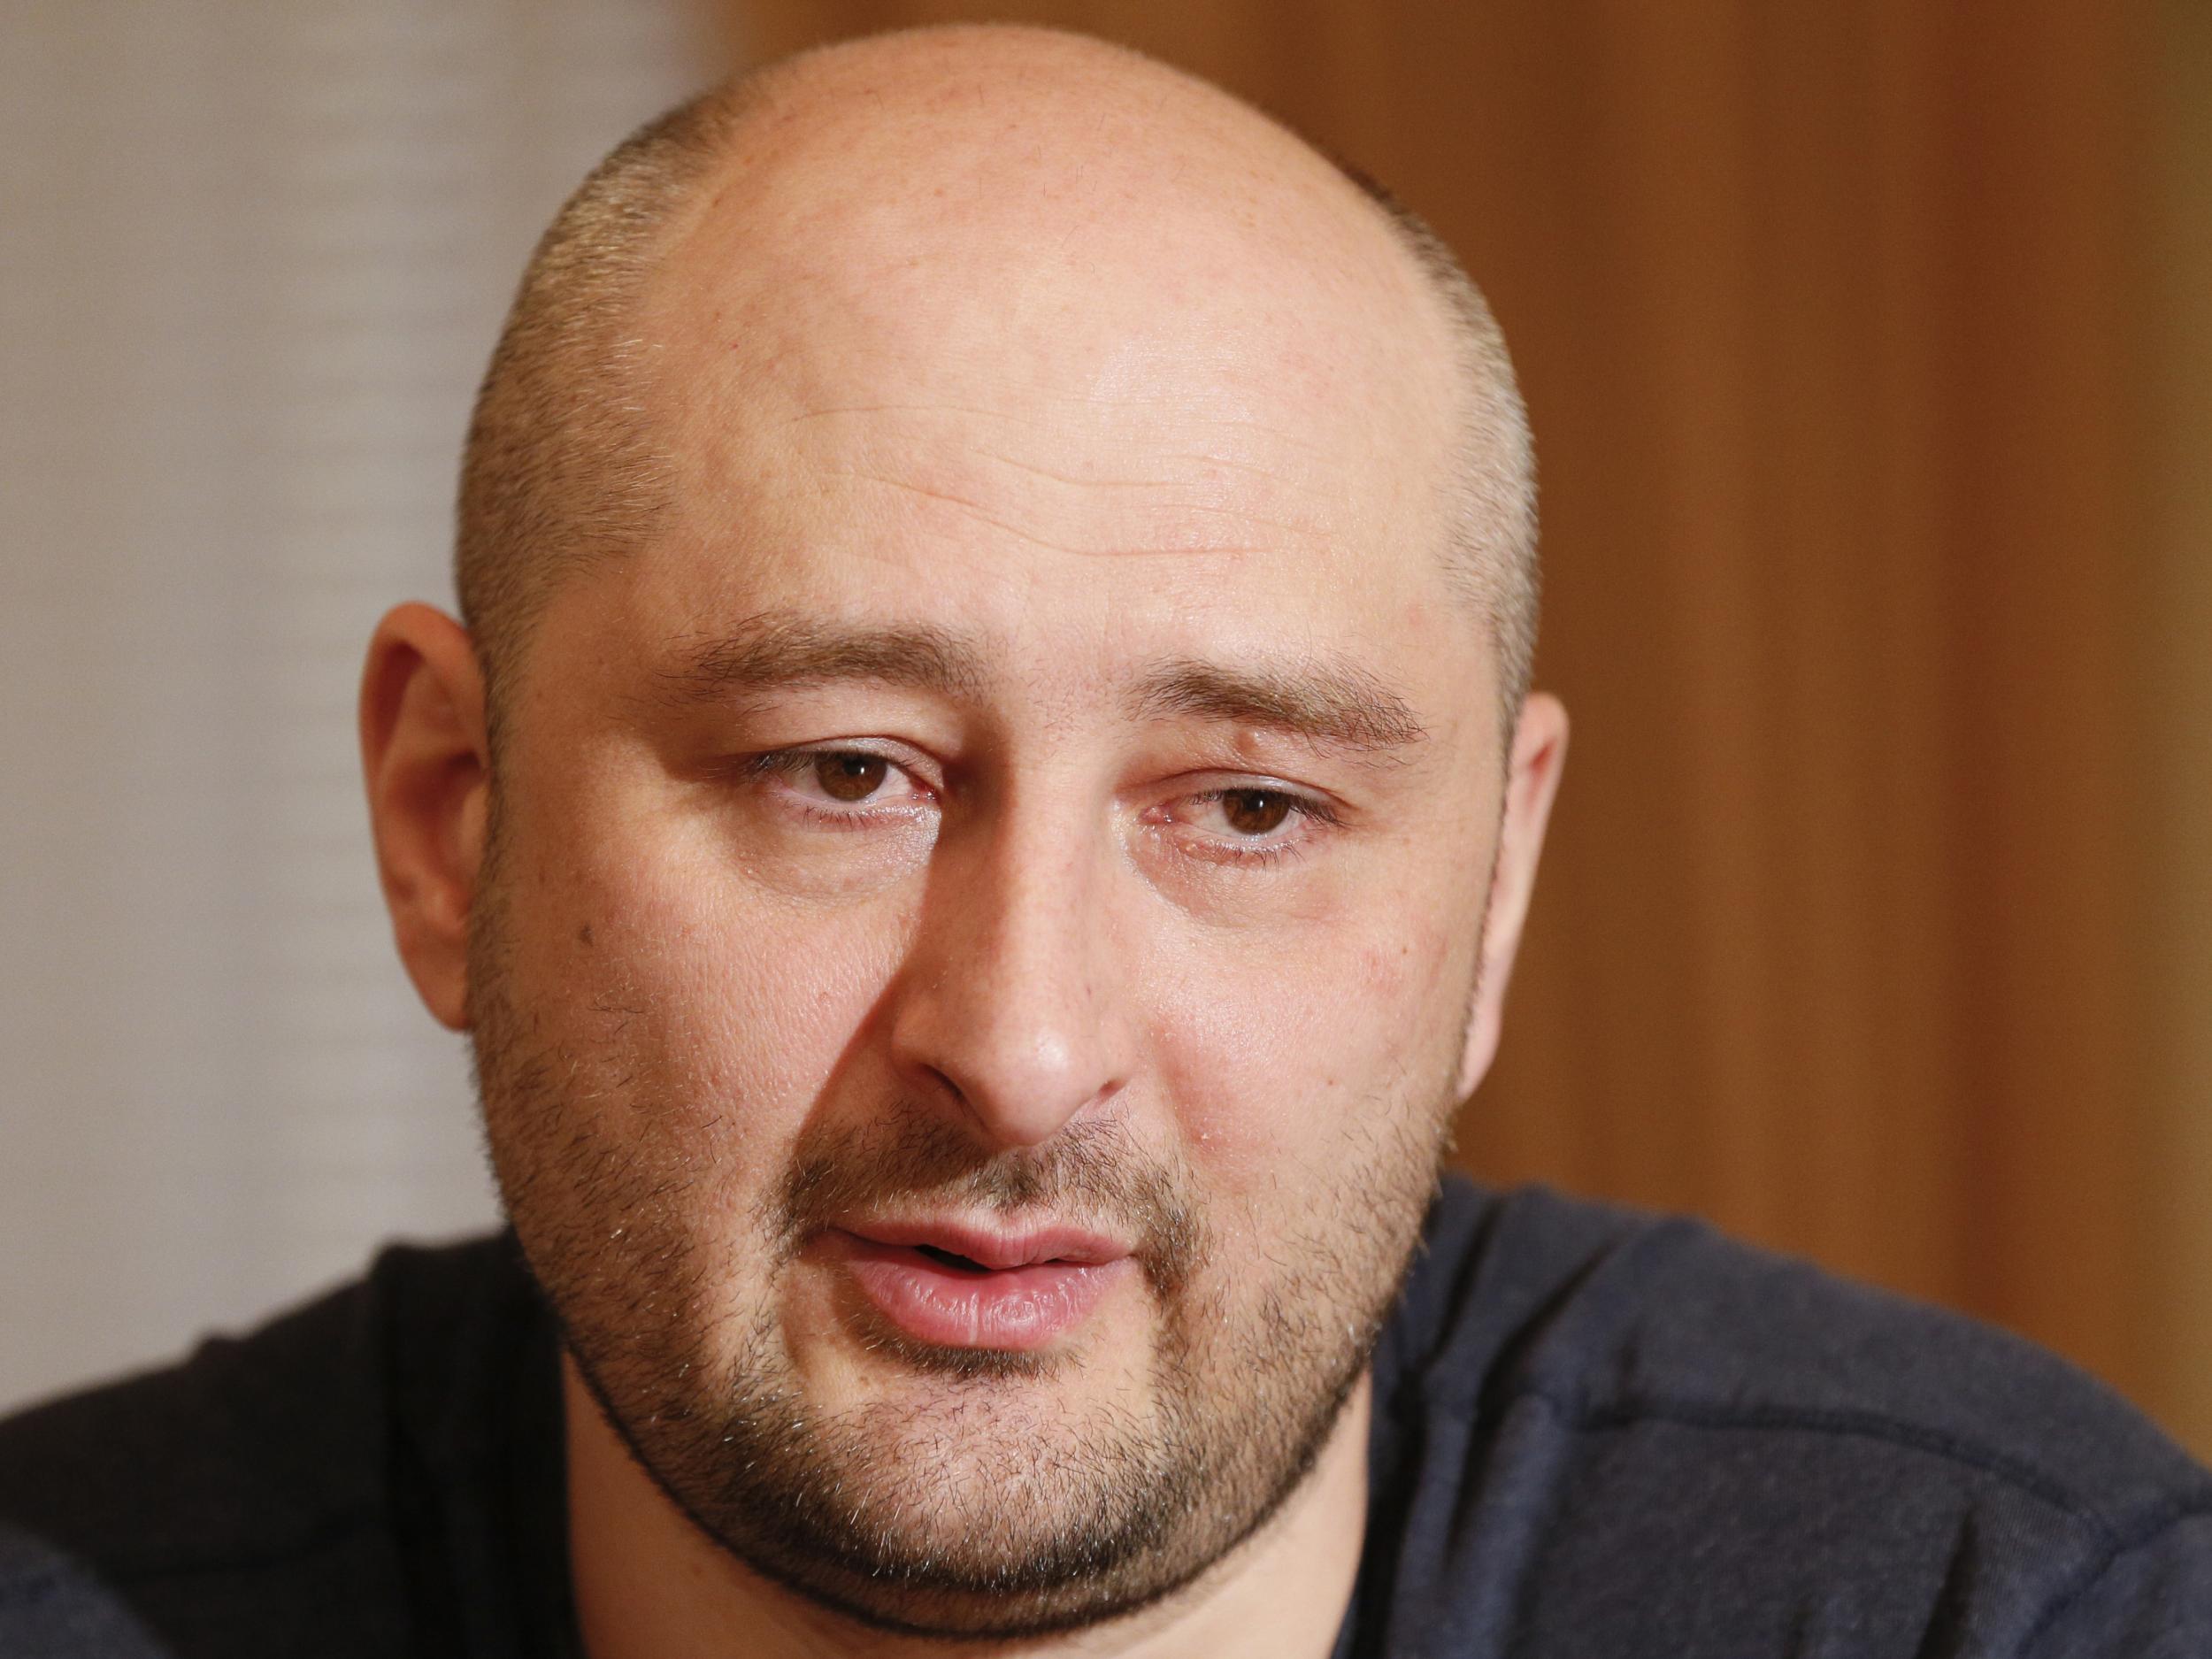 Russian dissident journalist Arkady Babchenko speaks during an interview with foreign media in Kiev on 31 May